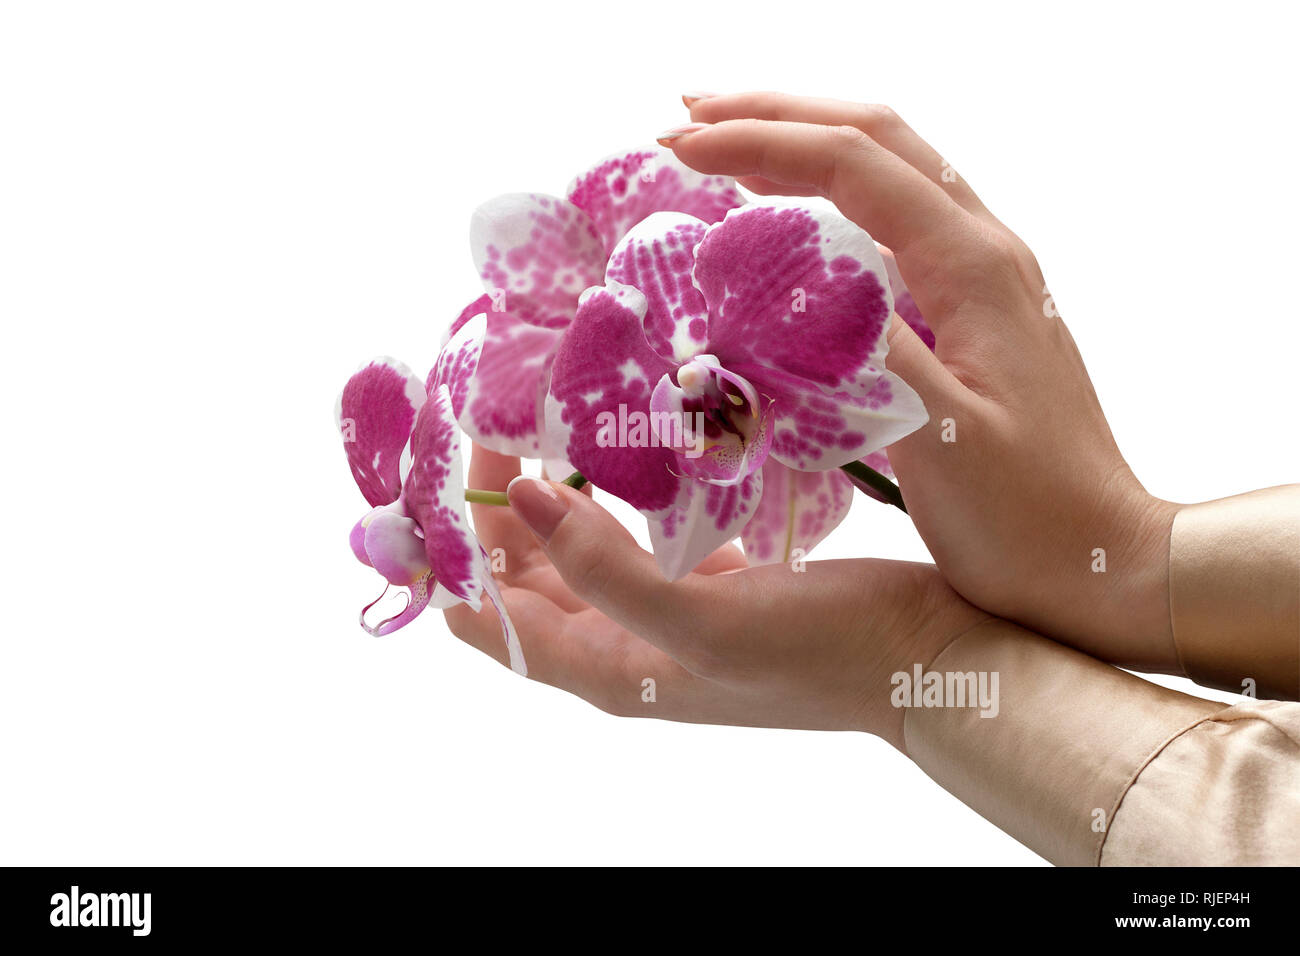 Elegant woman's hands with orchid flower. Fashion art portrait of young woman isolated on white Stock Photo